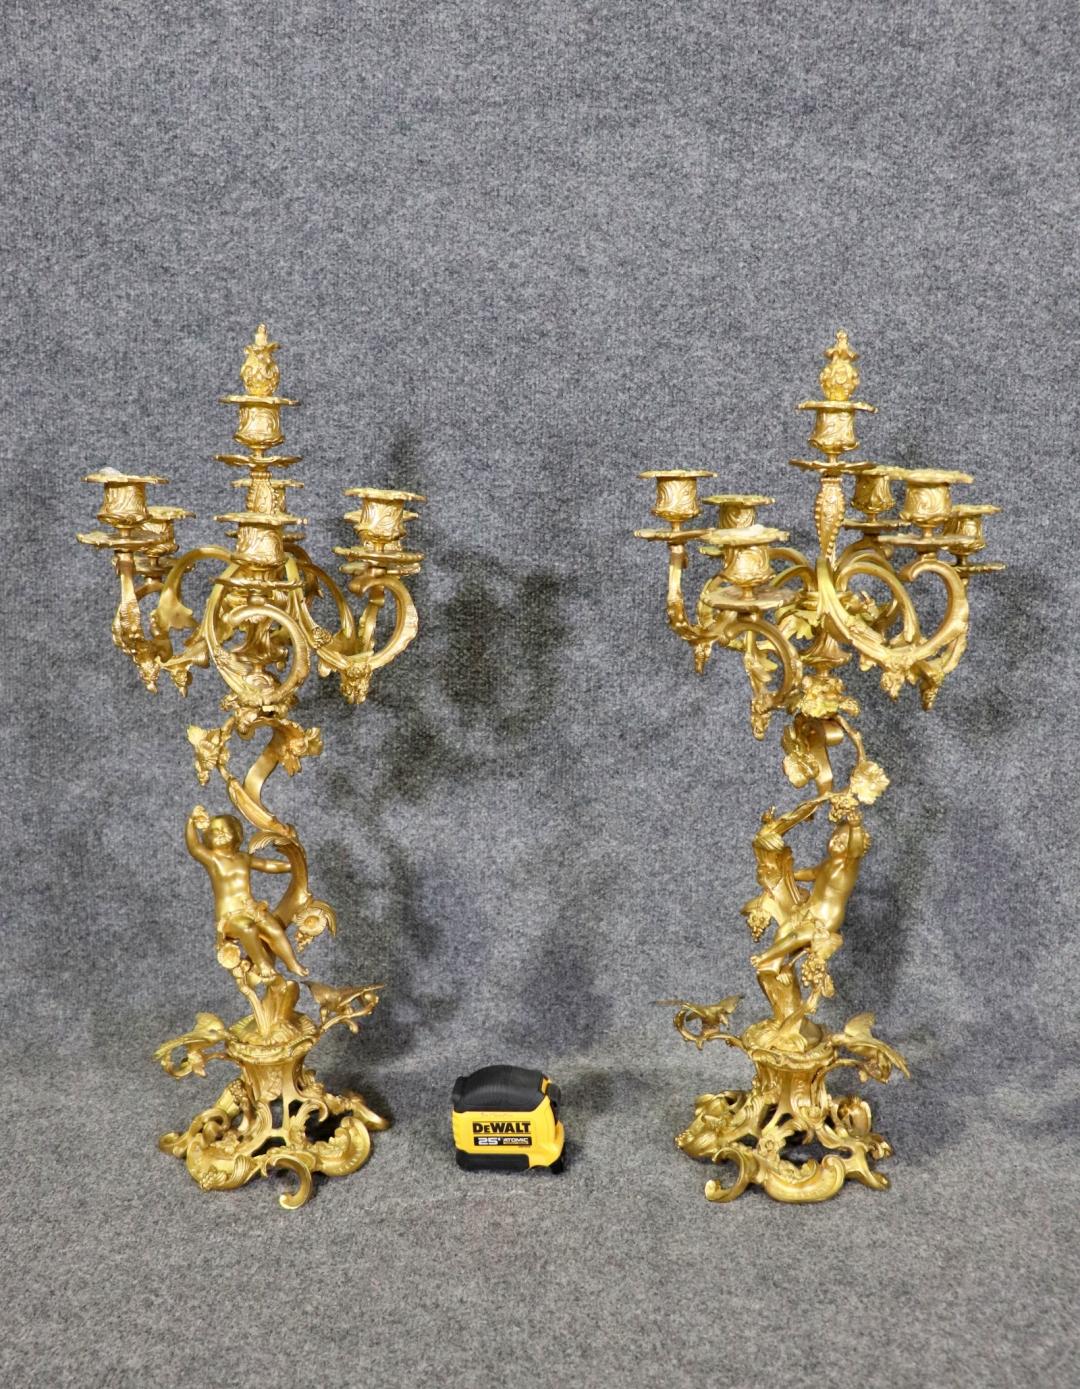 Rococo Revival Fantastic pair of Bronze French Rococo Candlelabra with Cherubs Putti 